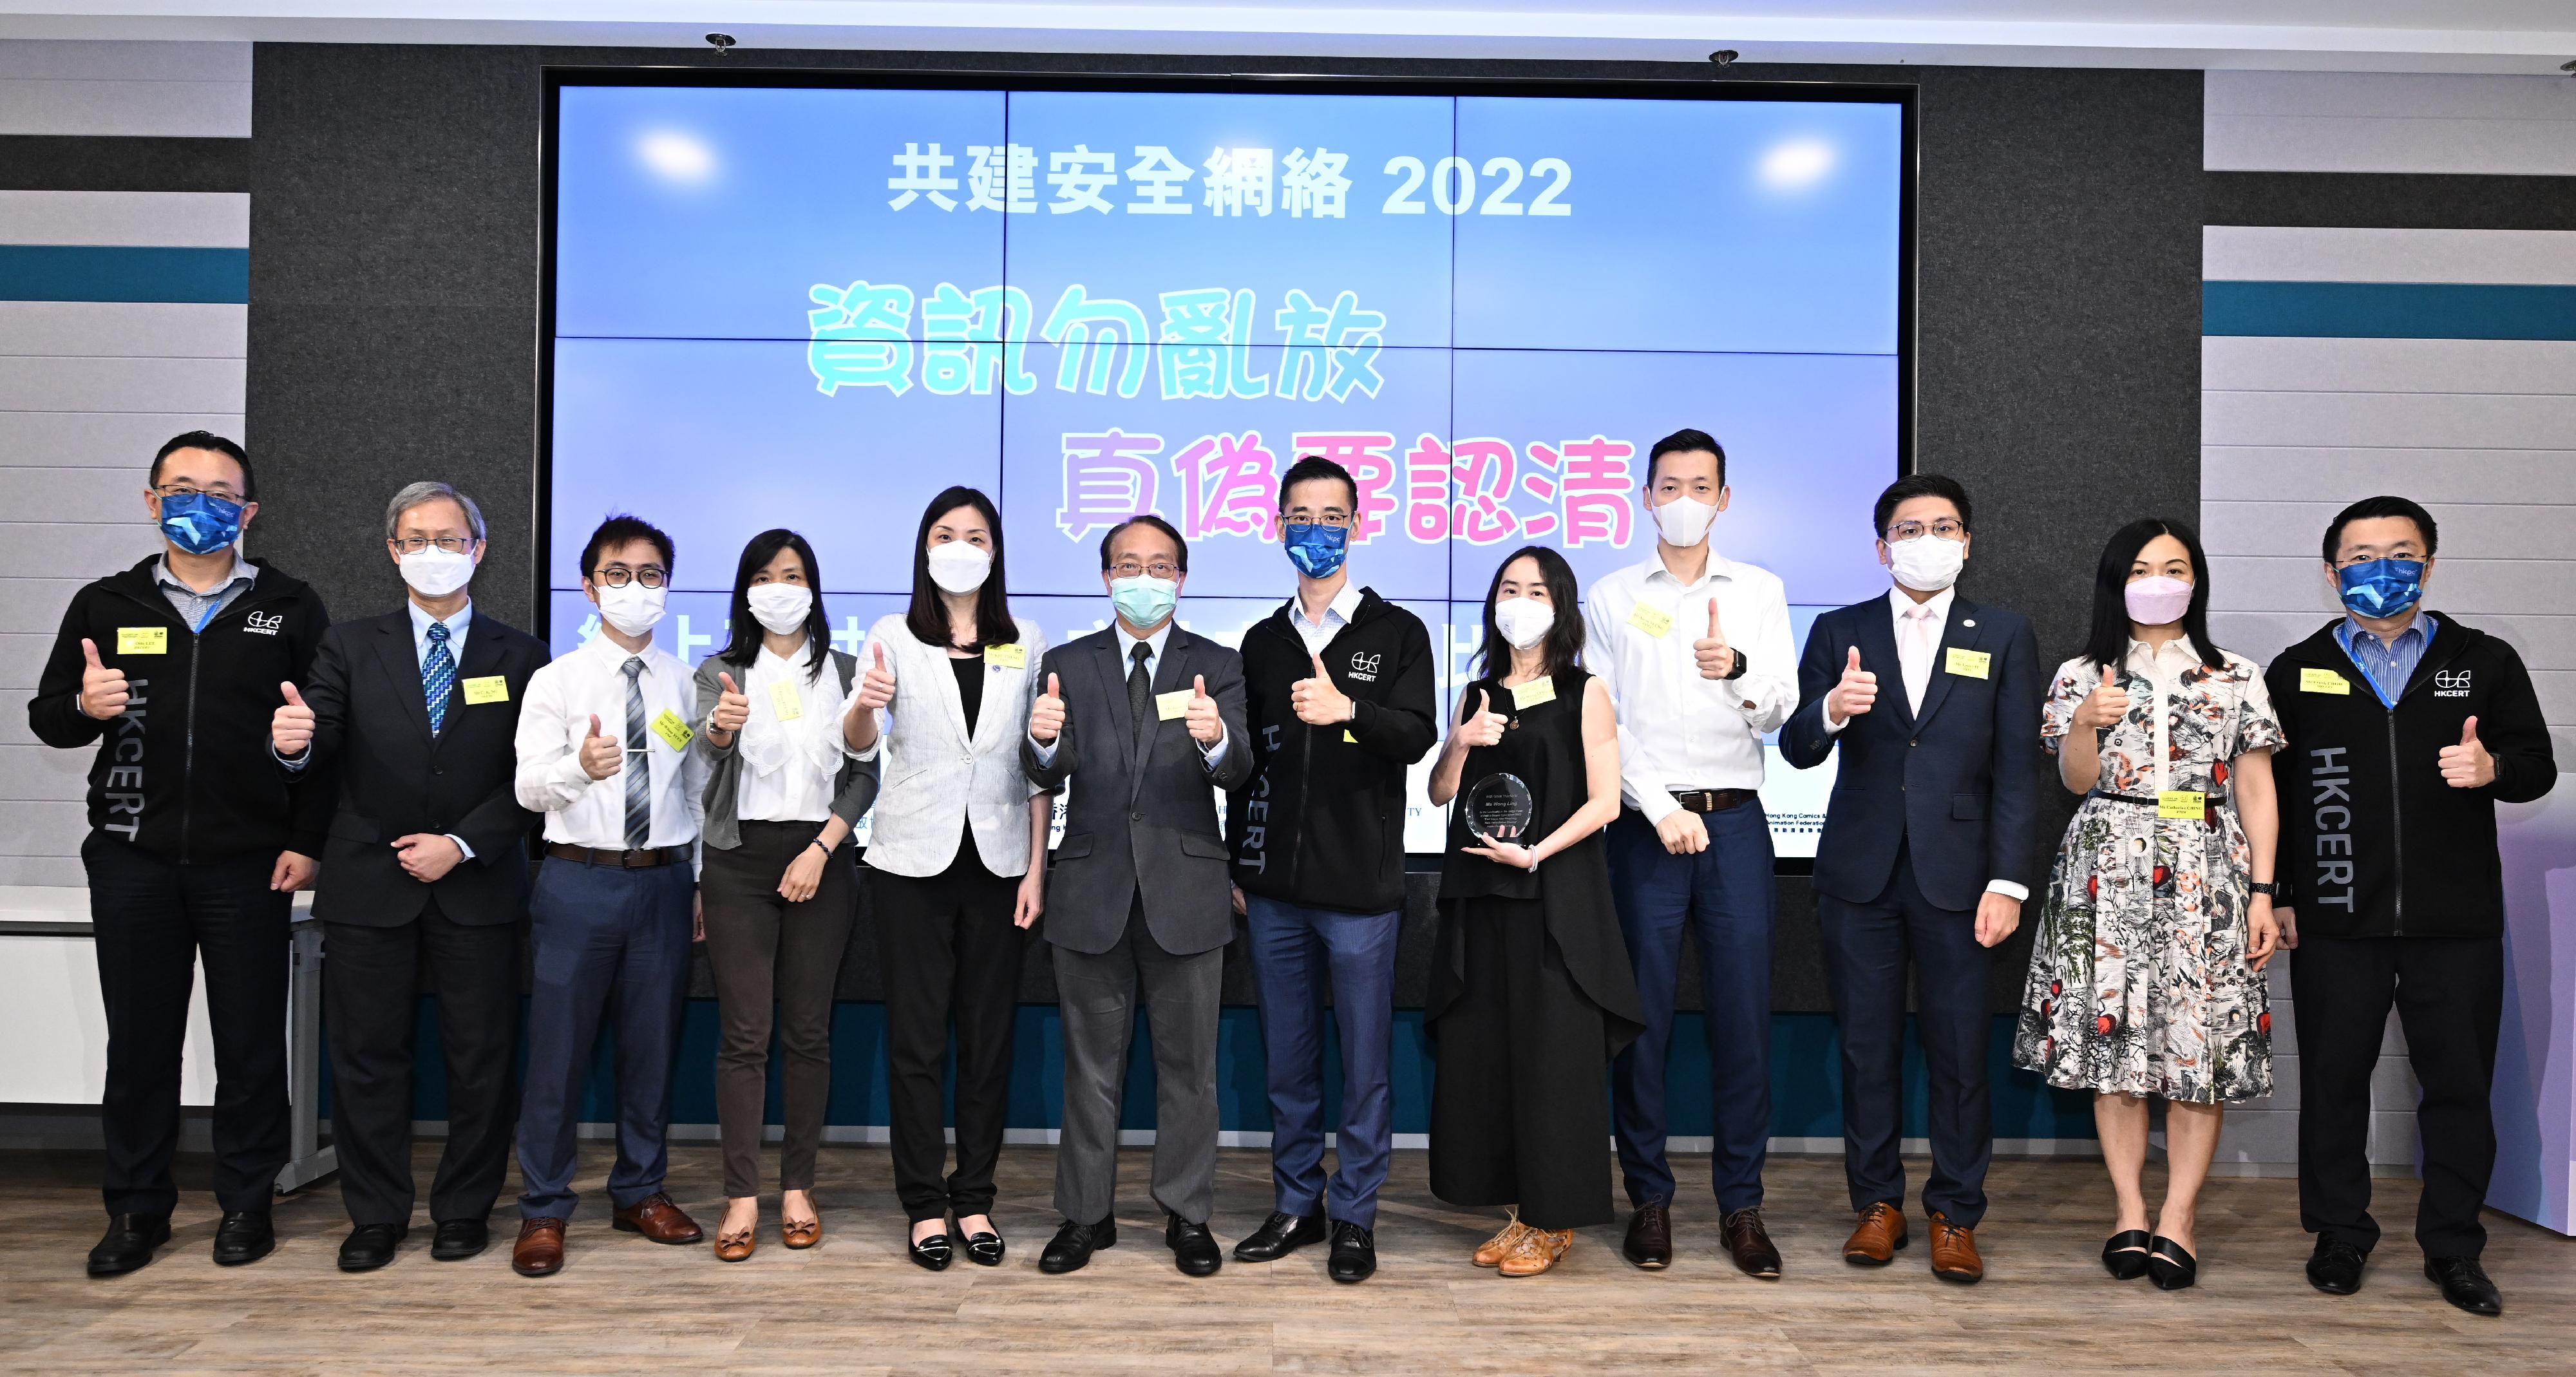 The Assistant Government Chief Information Officer, Mr Jason Pun (sixth left); the Chief Superintendent of the Cyber Security and Technology Crime Bureau, Hong Kong Police Force, Ms Cheng Lai-ki (fifth left); and the General Manager of Digital Transformation, Hong Kong Productivity Council, Mr Alex Chan (sixth right), are pictured with guests at the "Fact Check After Receiving, Think Twice Before Sharing" folder design contest award presentation ceremony today (September 23).